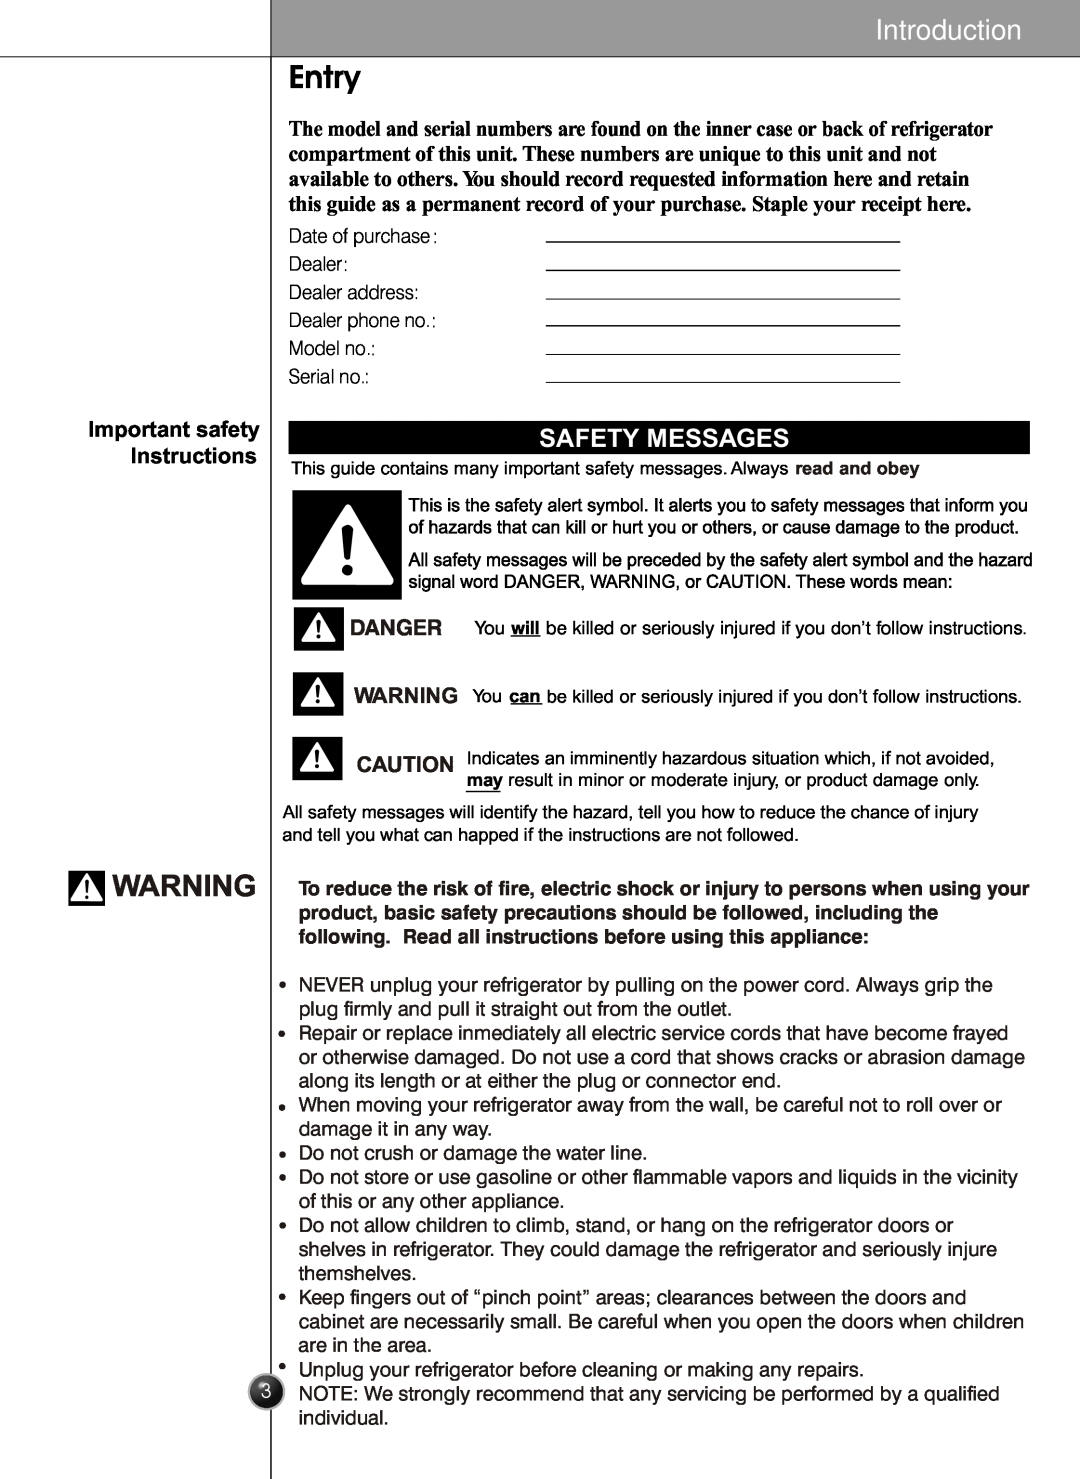 LG Electronics LSC26905 owner manual Entry, Introduction, Important safety Instructions, Danger, Safety Messages 